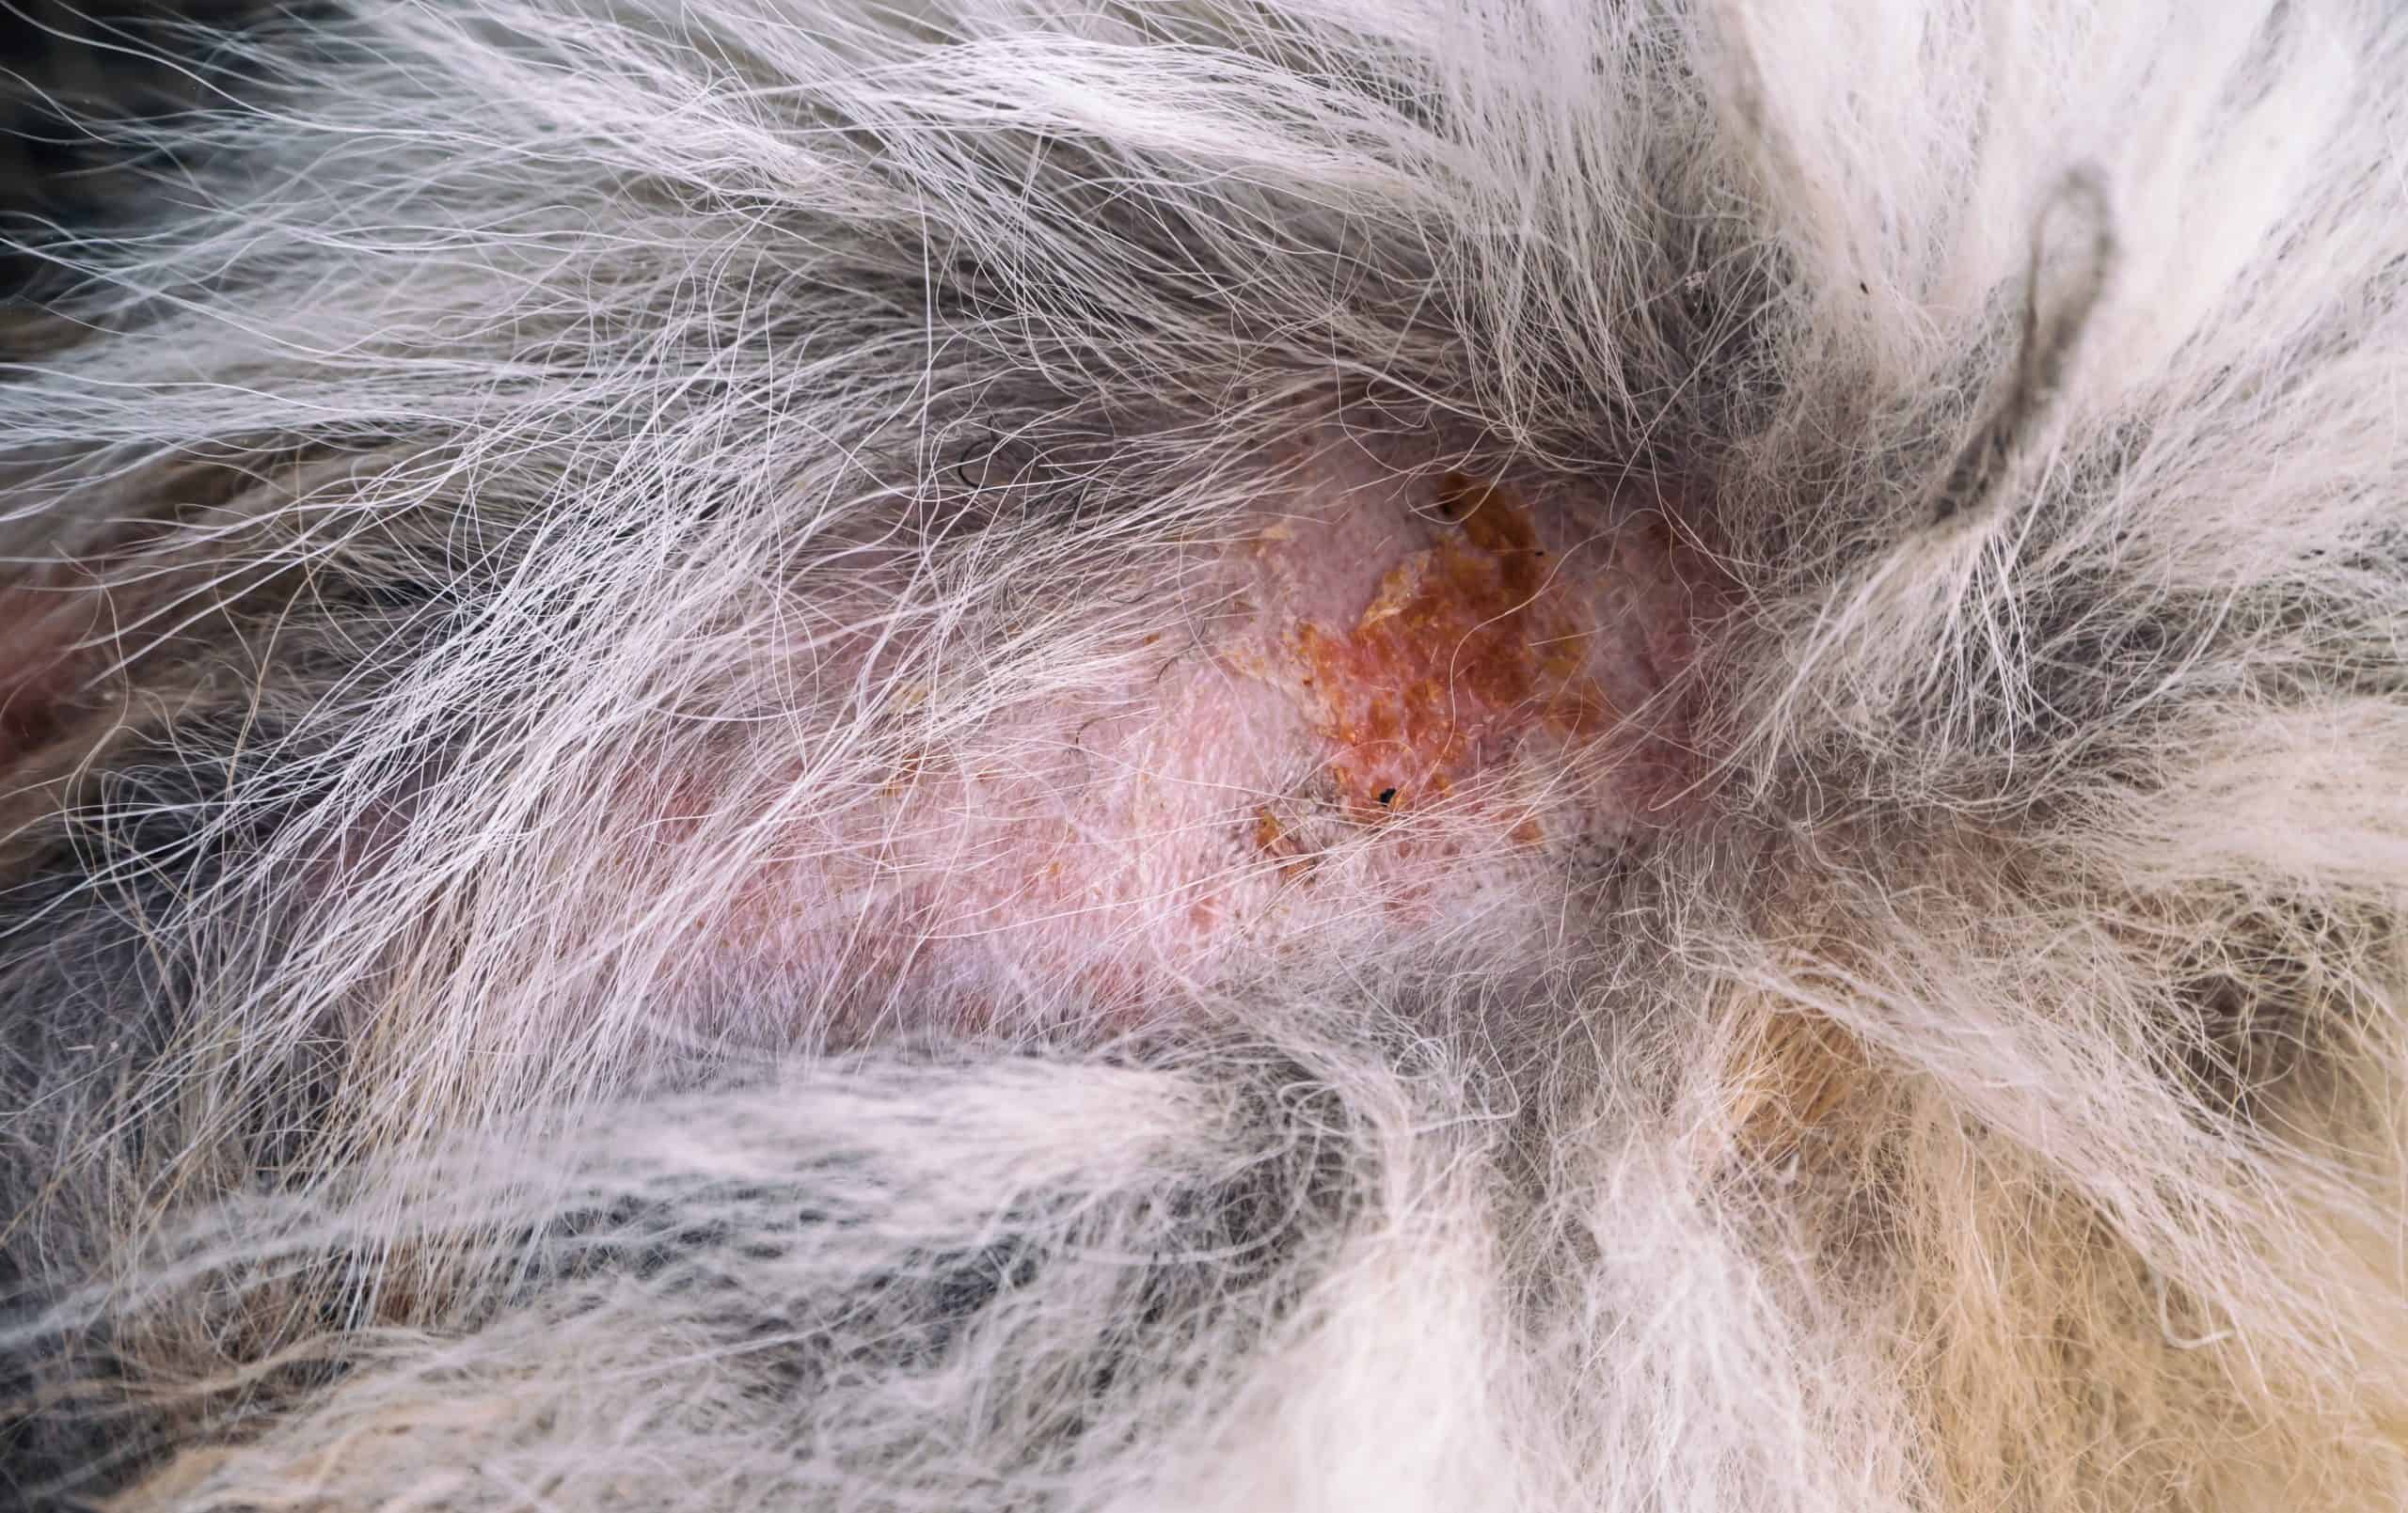 How To Treat Bug Bites On Your Dog, According To Vets